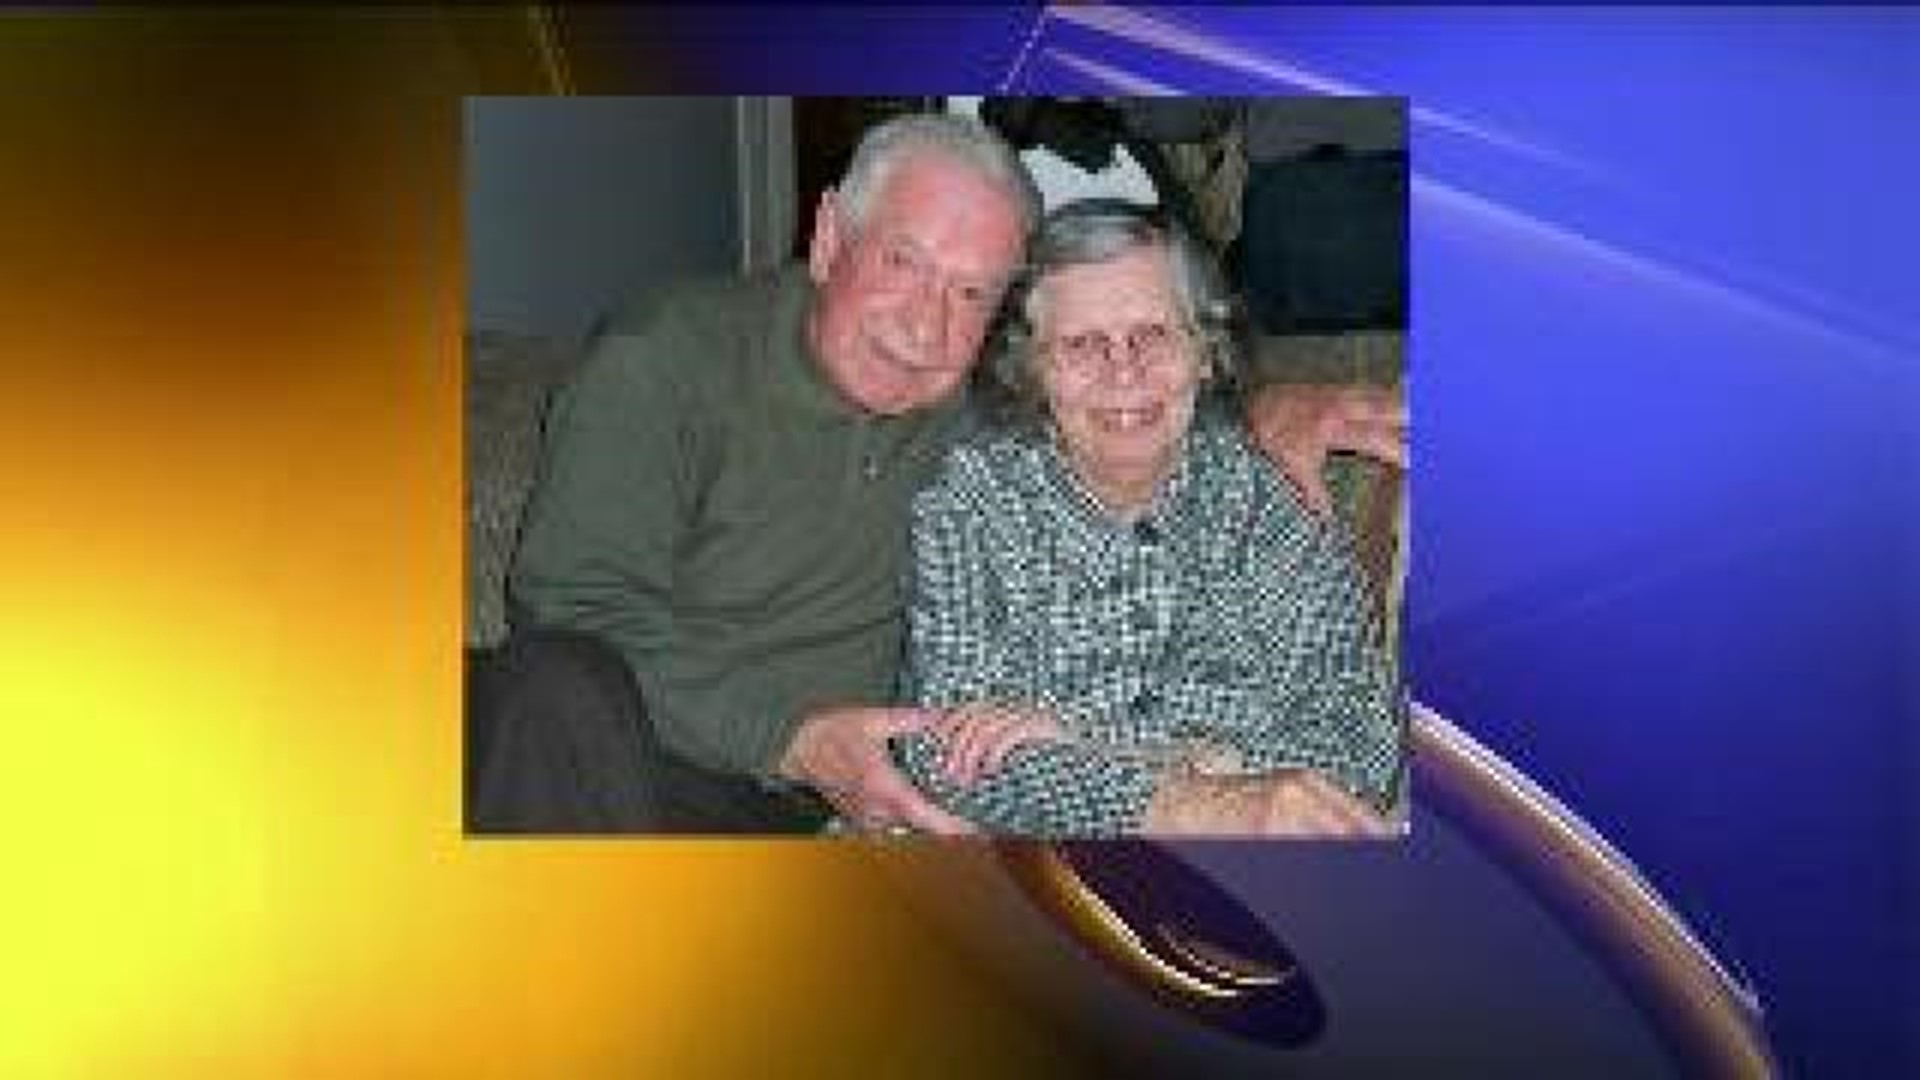 Neighbors Mourn Couple Involved in Murder/Suicide